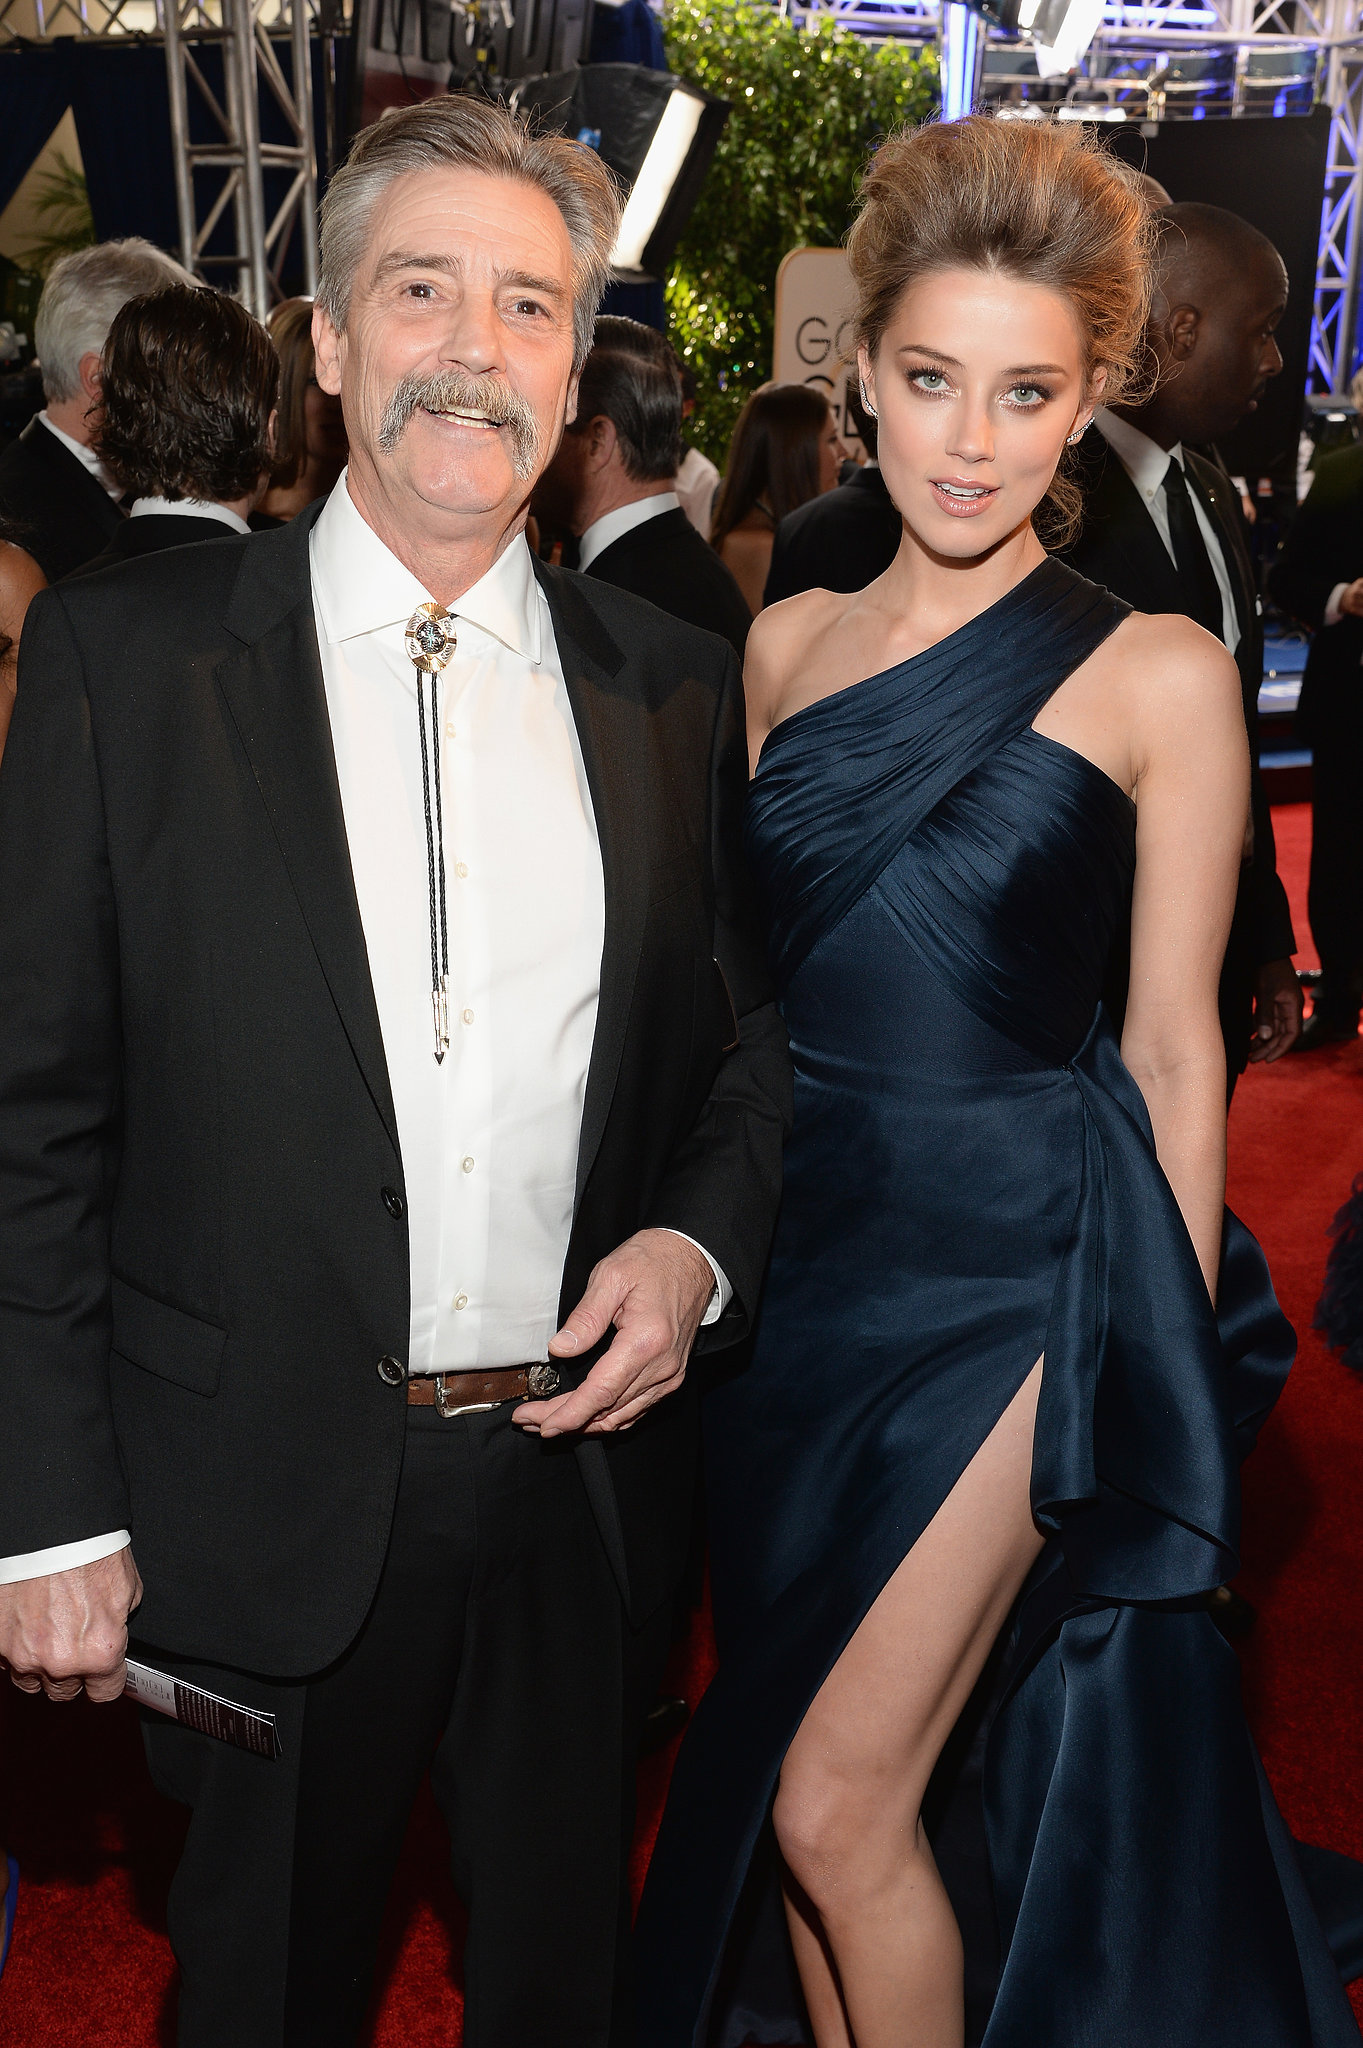 Amber Heard posed with her dad, David, on the red carpet at the For